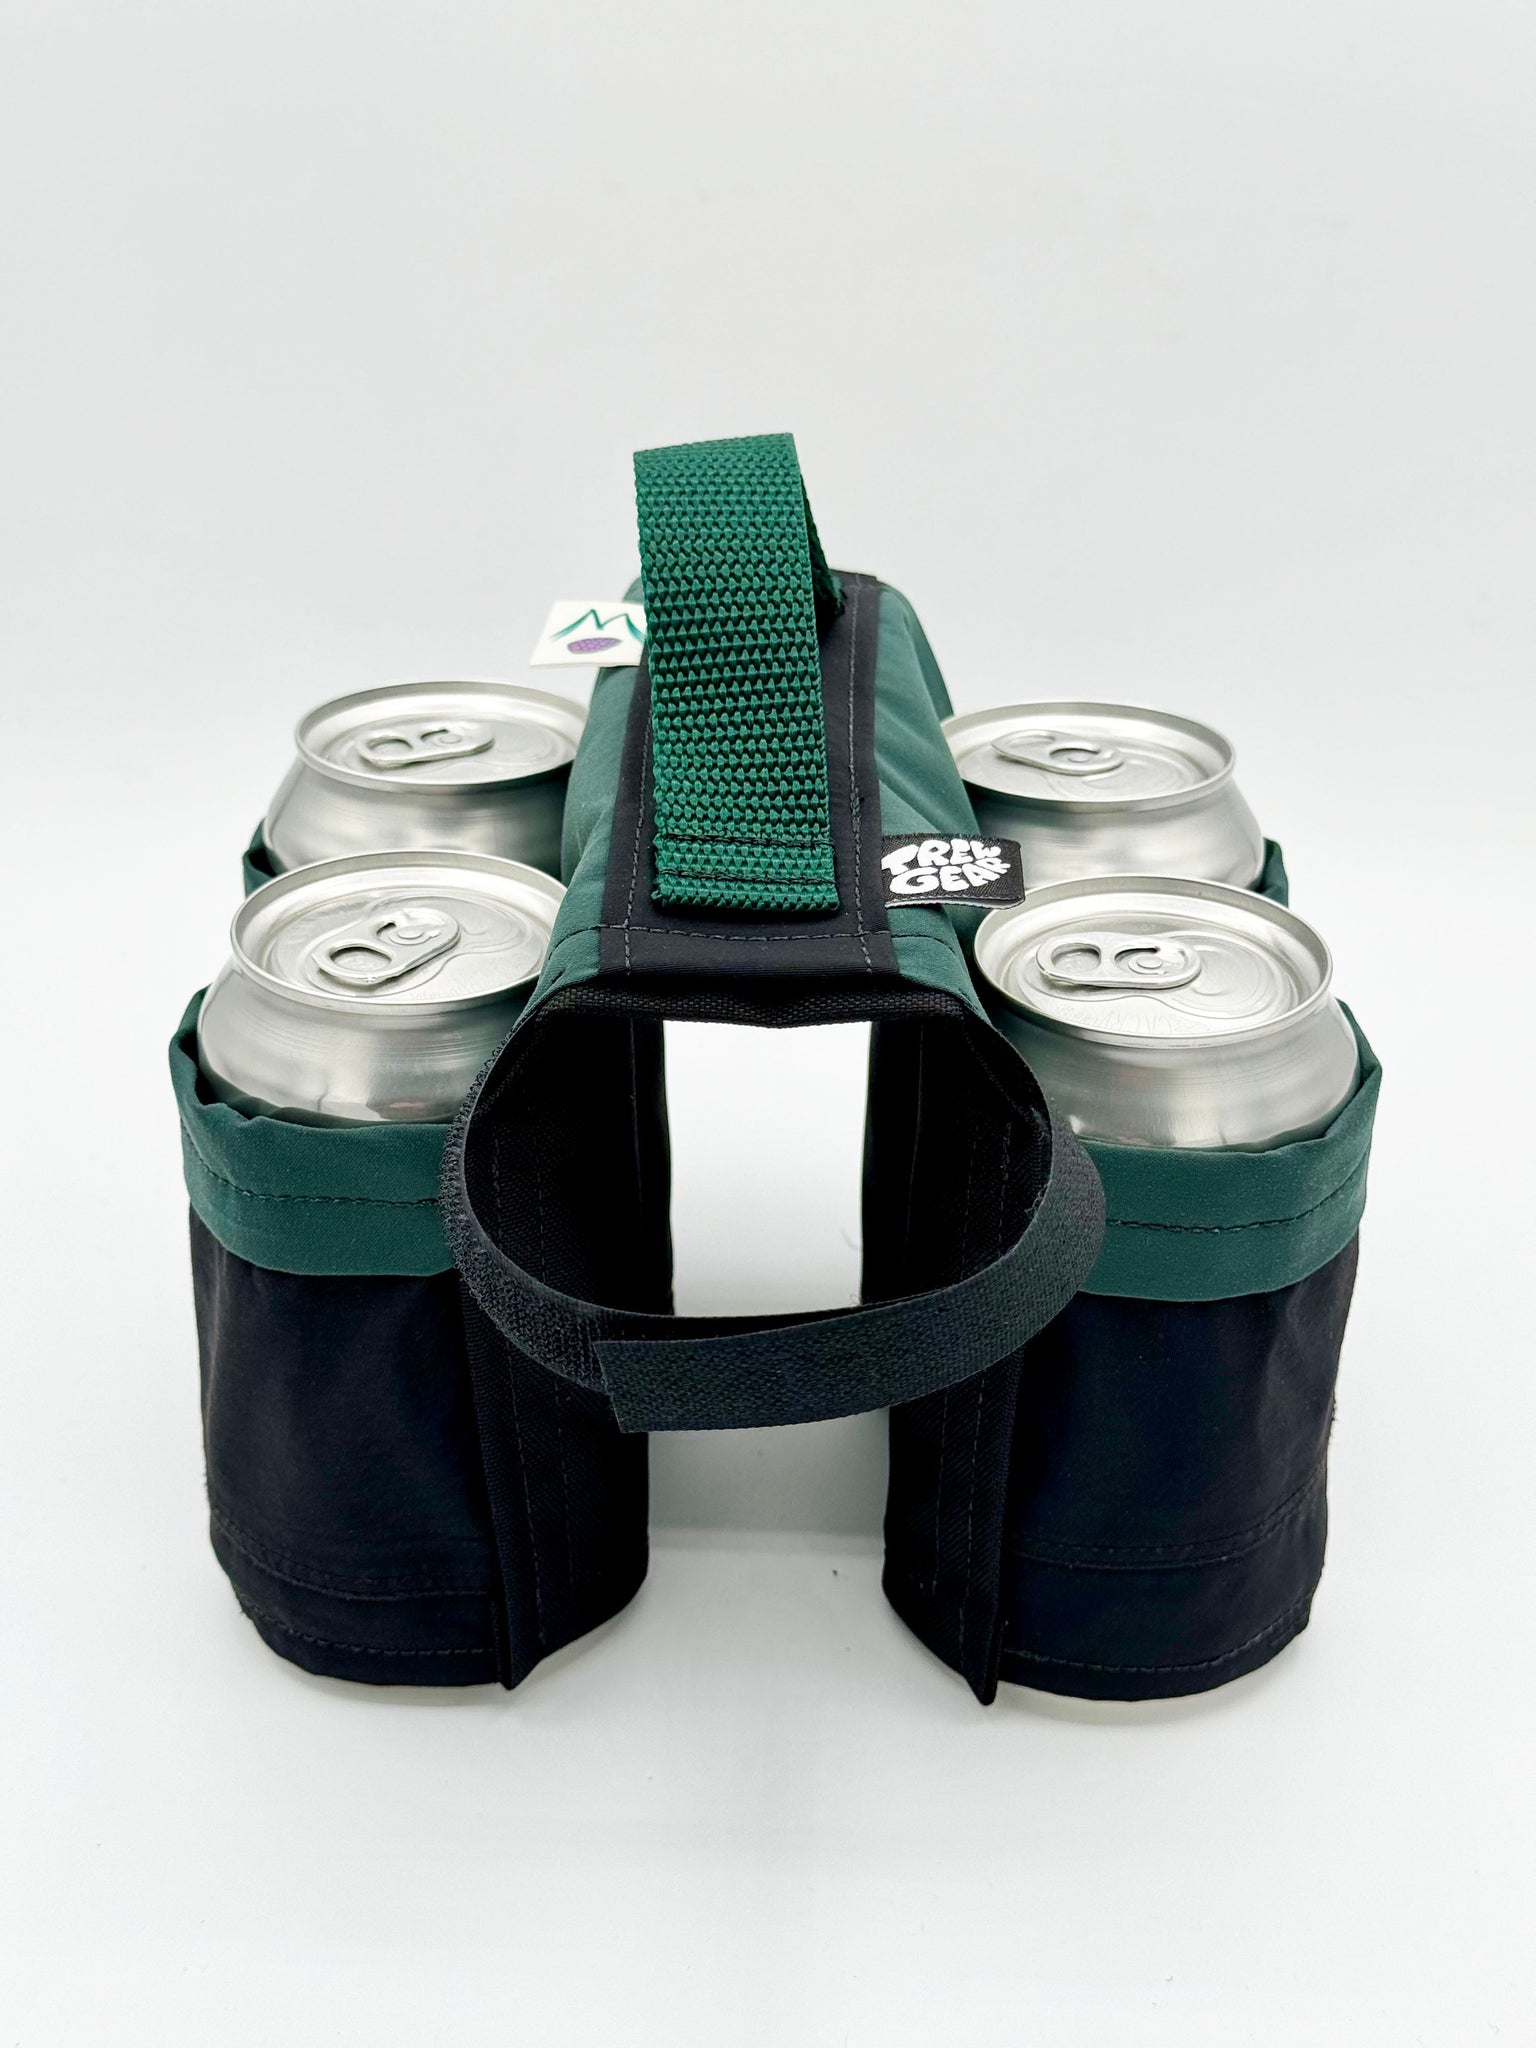 [AFTERLIFE] NEW!! Upcycled 4-Pack Can Holders